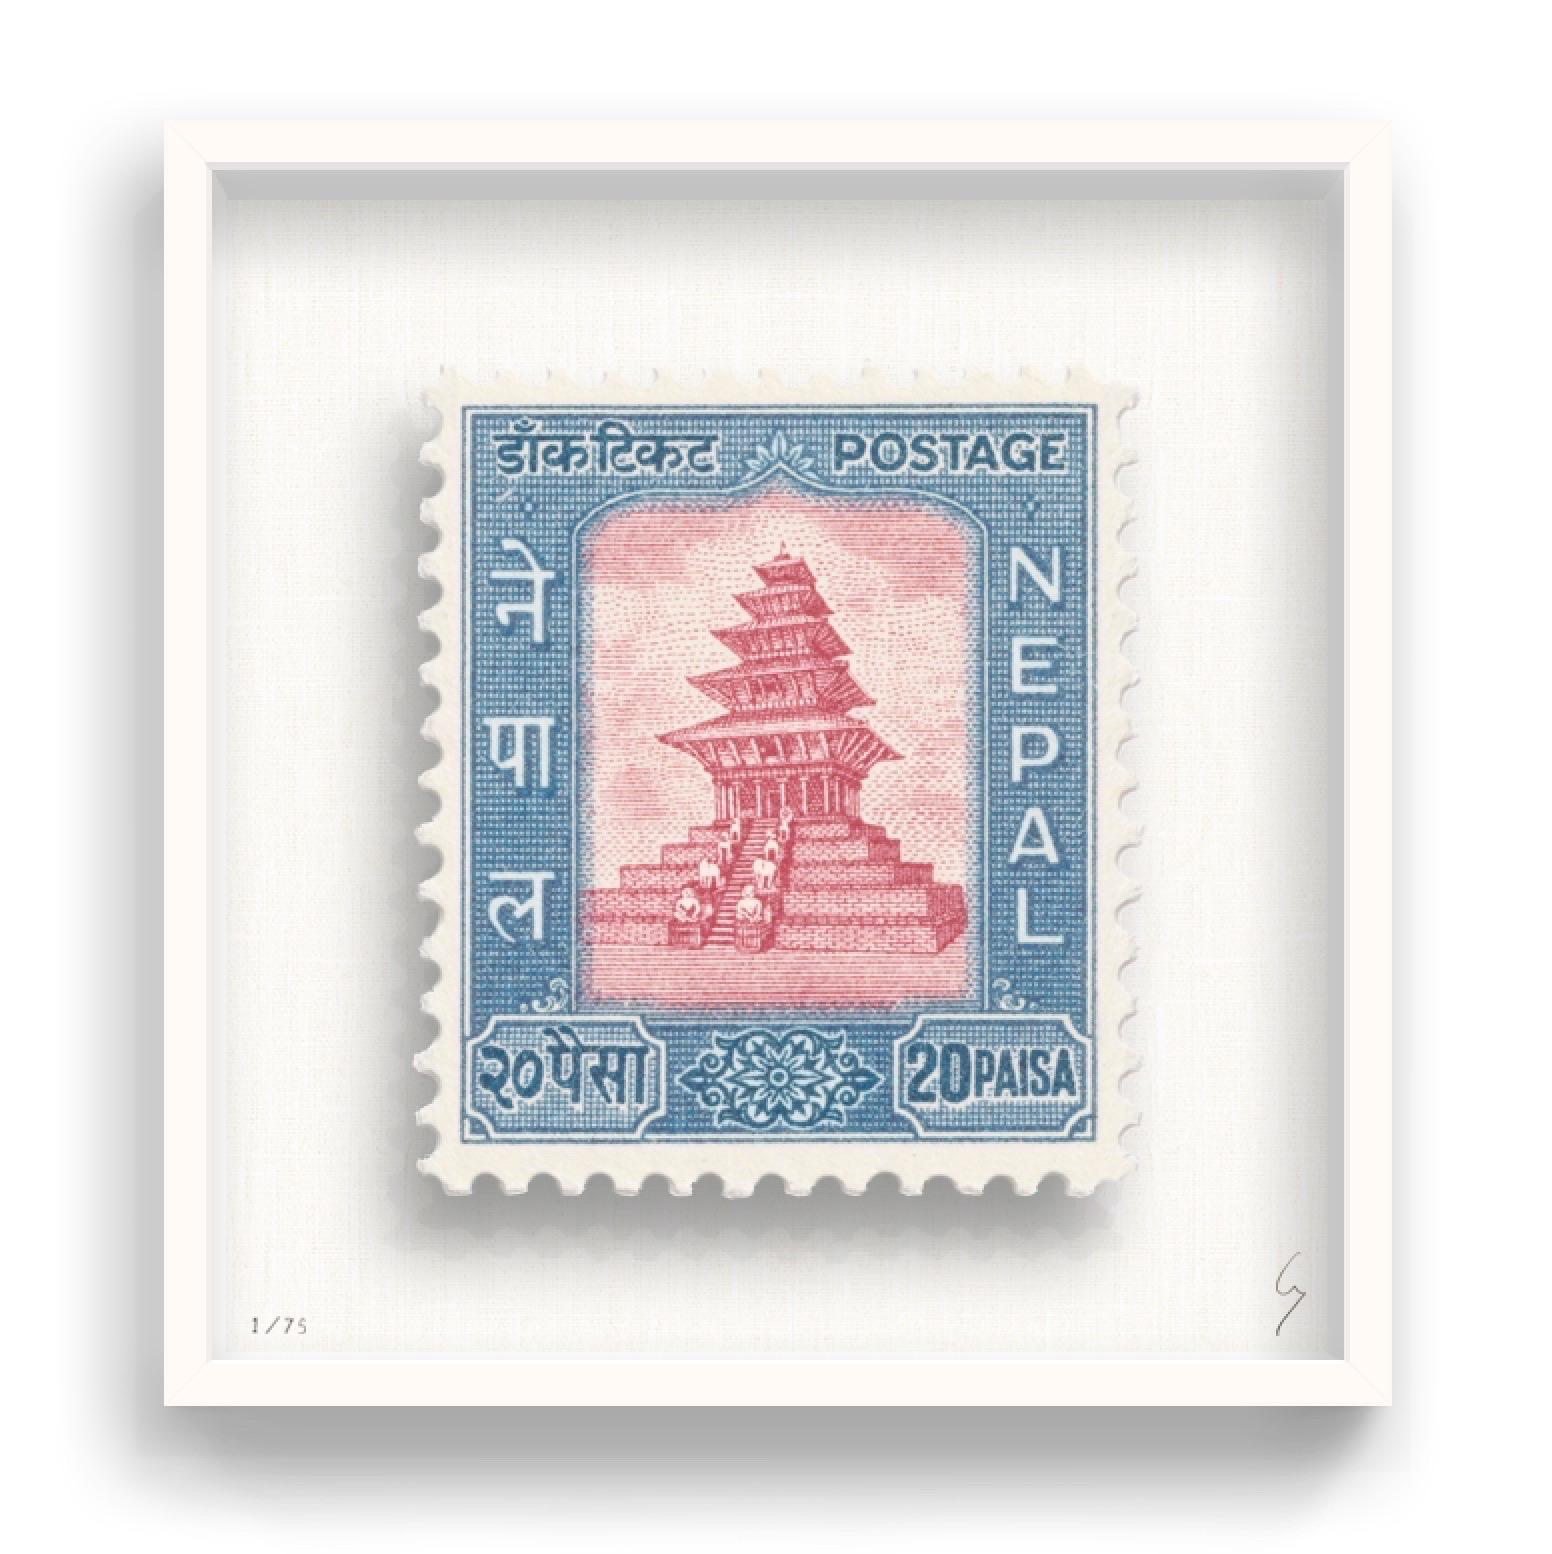 Guy Gee, Nepal (medium)

Hand-engraved print on 350gsm on G.F Smith card
53 x 56cm (20 4/5 x 22 2/5 in)
Frame included 
Edition of 75 

Each artwork by Guy had been digitally reimagined from an original postage stamp. Cut out and finished by hand,